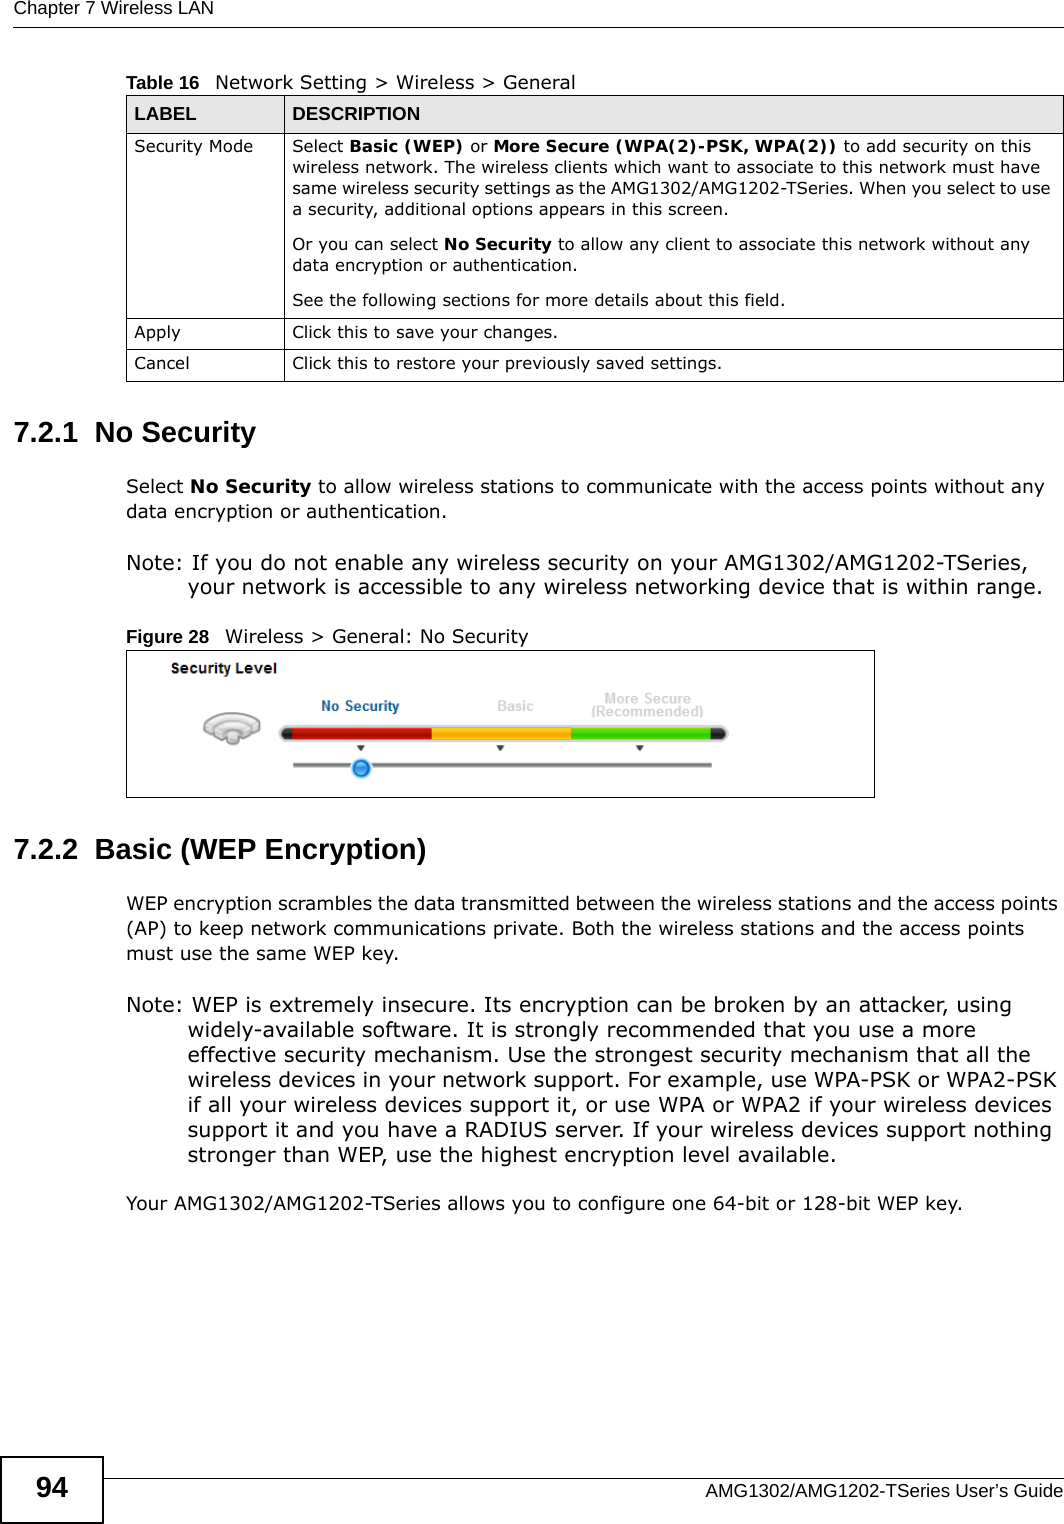 Chapter 7 Wireless LANAMG1302/AMG1202-TSeries User’s Guide947.2.1  No SecuritySelect No Security to allow wireless stations to communicate with the access points without any data encryption or authentication.Note: If you do not enable any wireless security on your AMG1302/AMG1202-TSeries, your network is accessible to any wireless networking device that is within range.Figure 28   Wireless &gt; General: No Security7.2.2  Basic (WEP Encryption)WEP encryption scrambles the data transmitted between the wireless stations and the access points (AP) to keep network communications private. Both the wireless stations and the access points must use the same WEP key.Note: WEP is extremely insecure. Its encryption can be broken by an attacker, using widely-available software. It is strongly recommended that you use a more effective security mechanism. Use the strongest security mechanism that all the wireless devices in your network support. For example, use WPA-PSK or WPA2-PSK if all your wireless devices support it, or use WPA or WPA2 if your wireless devices support it and you have a RADIUS server. If your wireless devices support nothing stronger than WEP, use the highest encryption level available.Your AMG1302/AMG1202-TSeries allows you to configure one 64-bit or 128-bit WEP key.Security Mode Select Basic (WEP) or More Secure (WPA(2)-PSK, WPA(2)) to add security on this wireless network. The wireless clients which want to associate to this network must have same wireless security settings as the AMG1302/AMG1202-TSeries. When you select to use a security, additional options appears in this screen. Or you can select No Security to allow any client to associate this network without any data encryption or authentication.See the following sections for more details about this field.Apply Click this to save your changes.Cancel Click this to restore your previously saved settings.Table 16   Network Setting &gt; Wireless &gt; GeneralLABEL DESCRIPTION